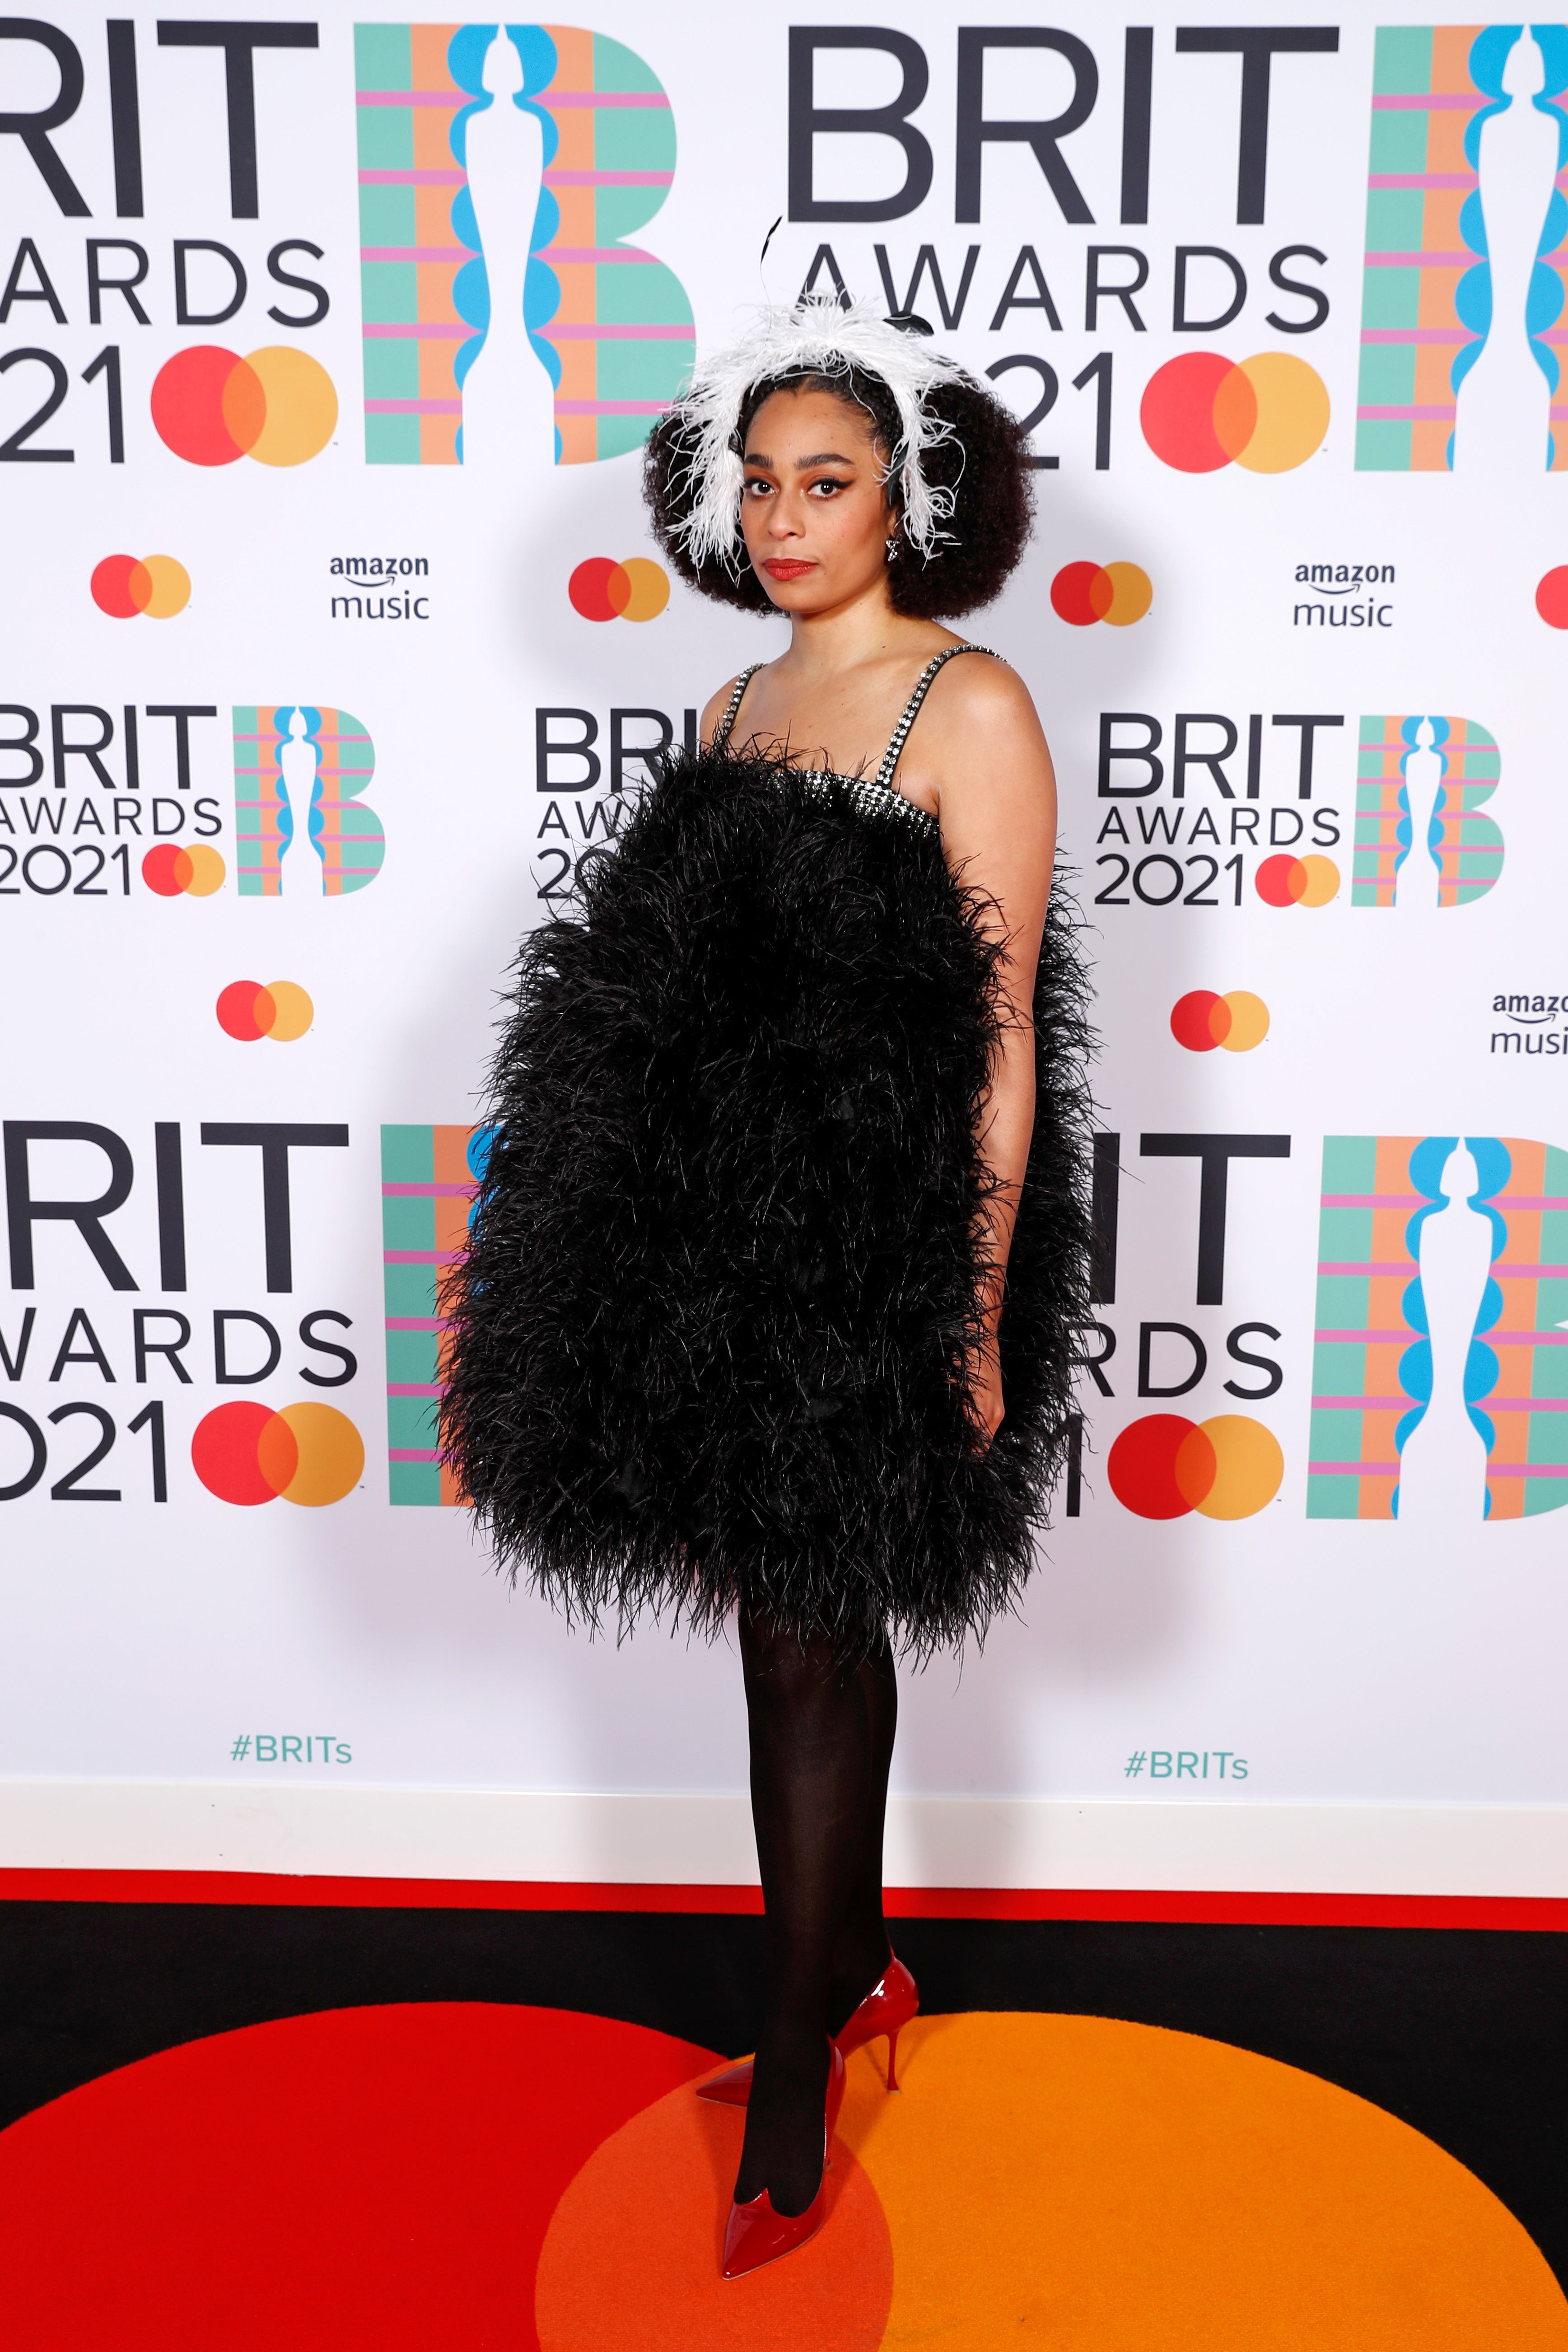 The best looks served at the 2021 Brit Awards